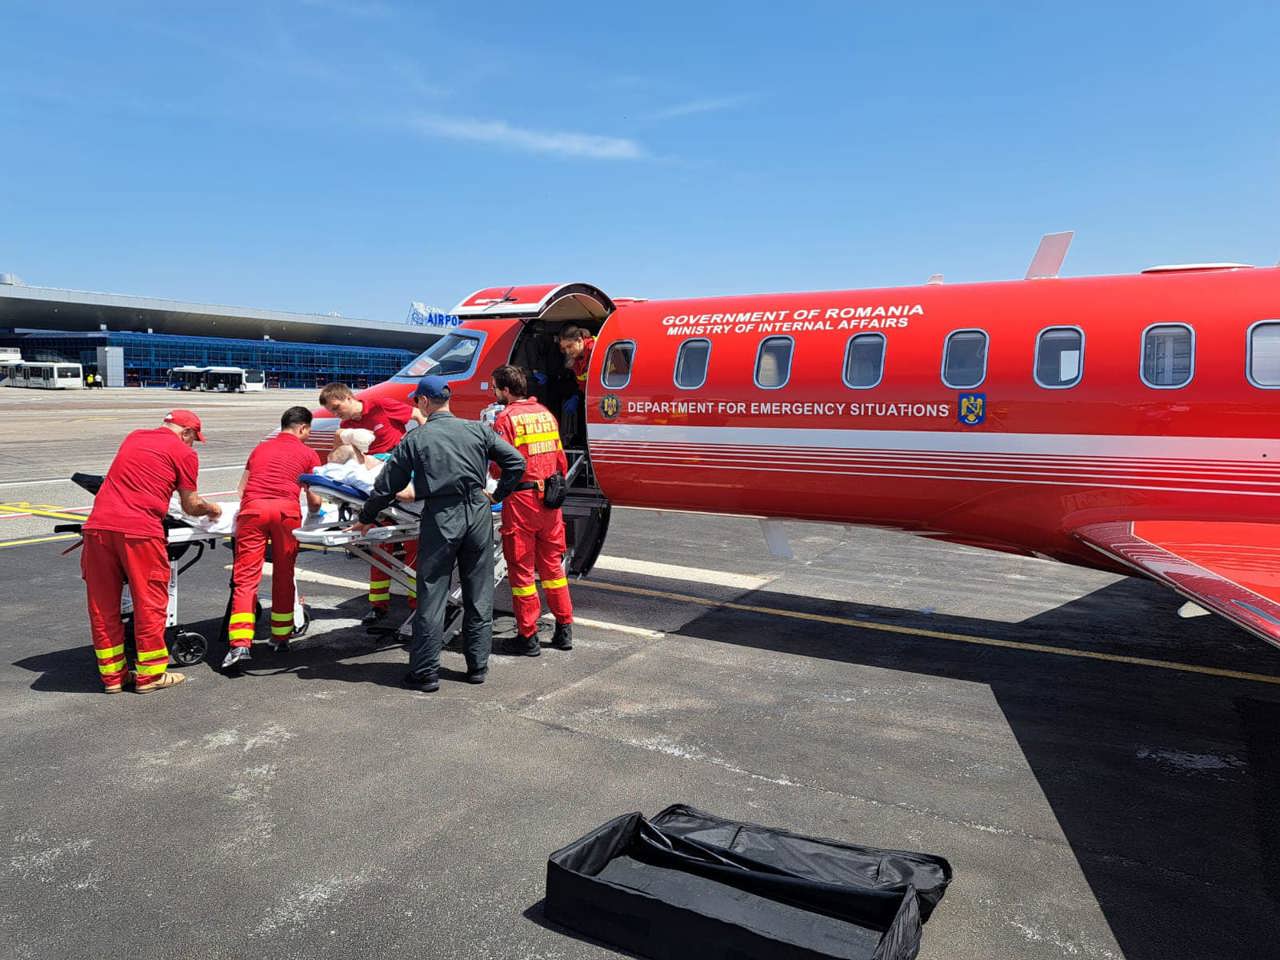 Premiere for the Republic of Moldova: A patient was brought from Serbia by SMURD Romania plane